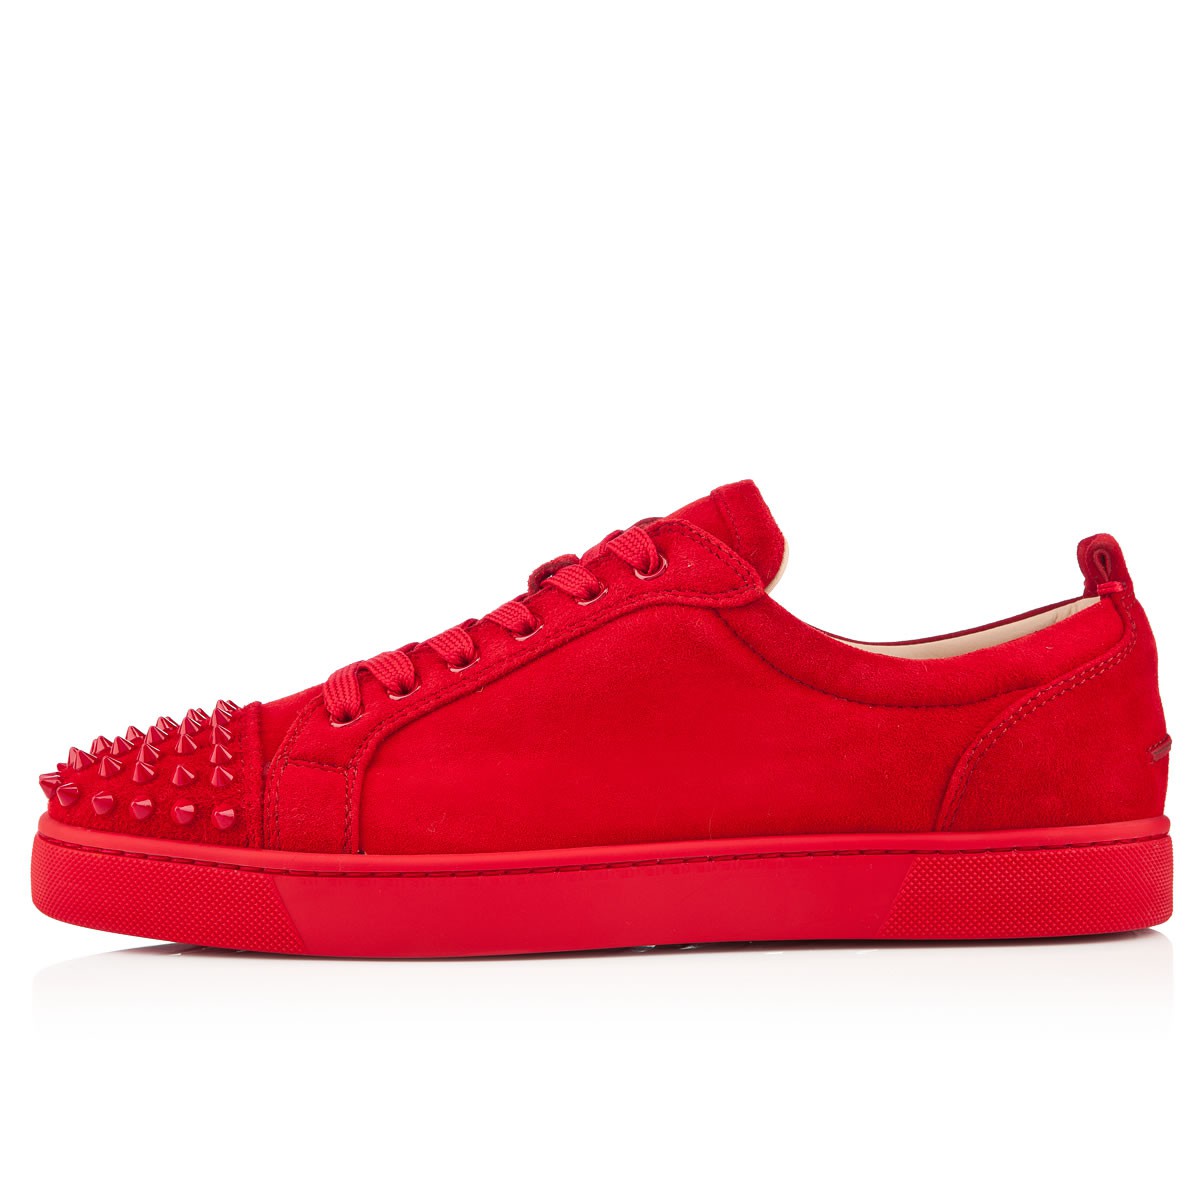 Christian Louboutin Louis Junior Spikes - Red Suede | Sole Collector